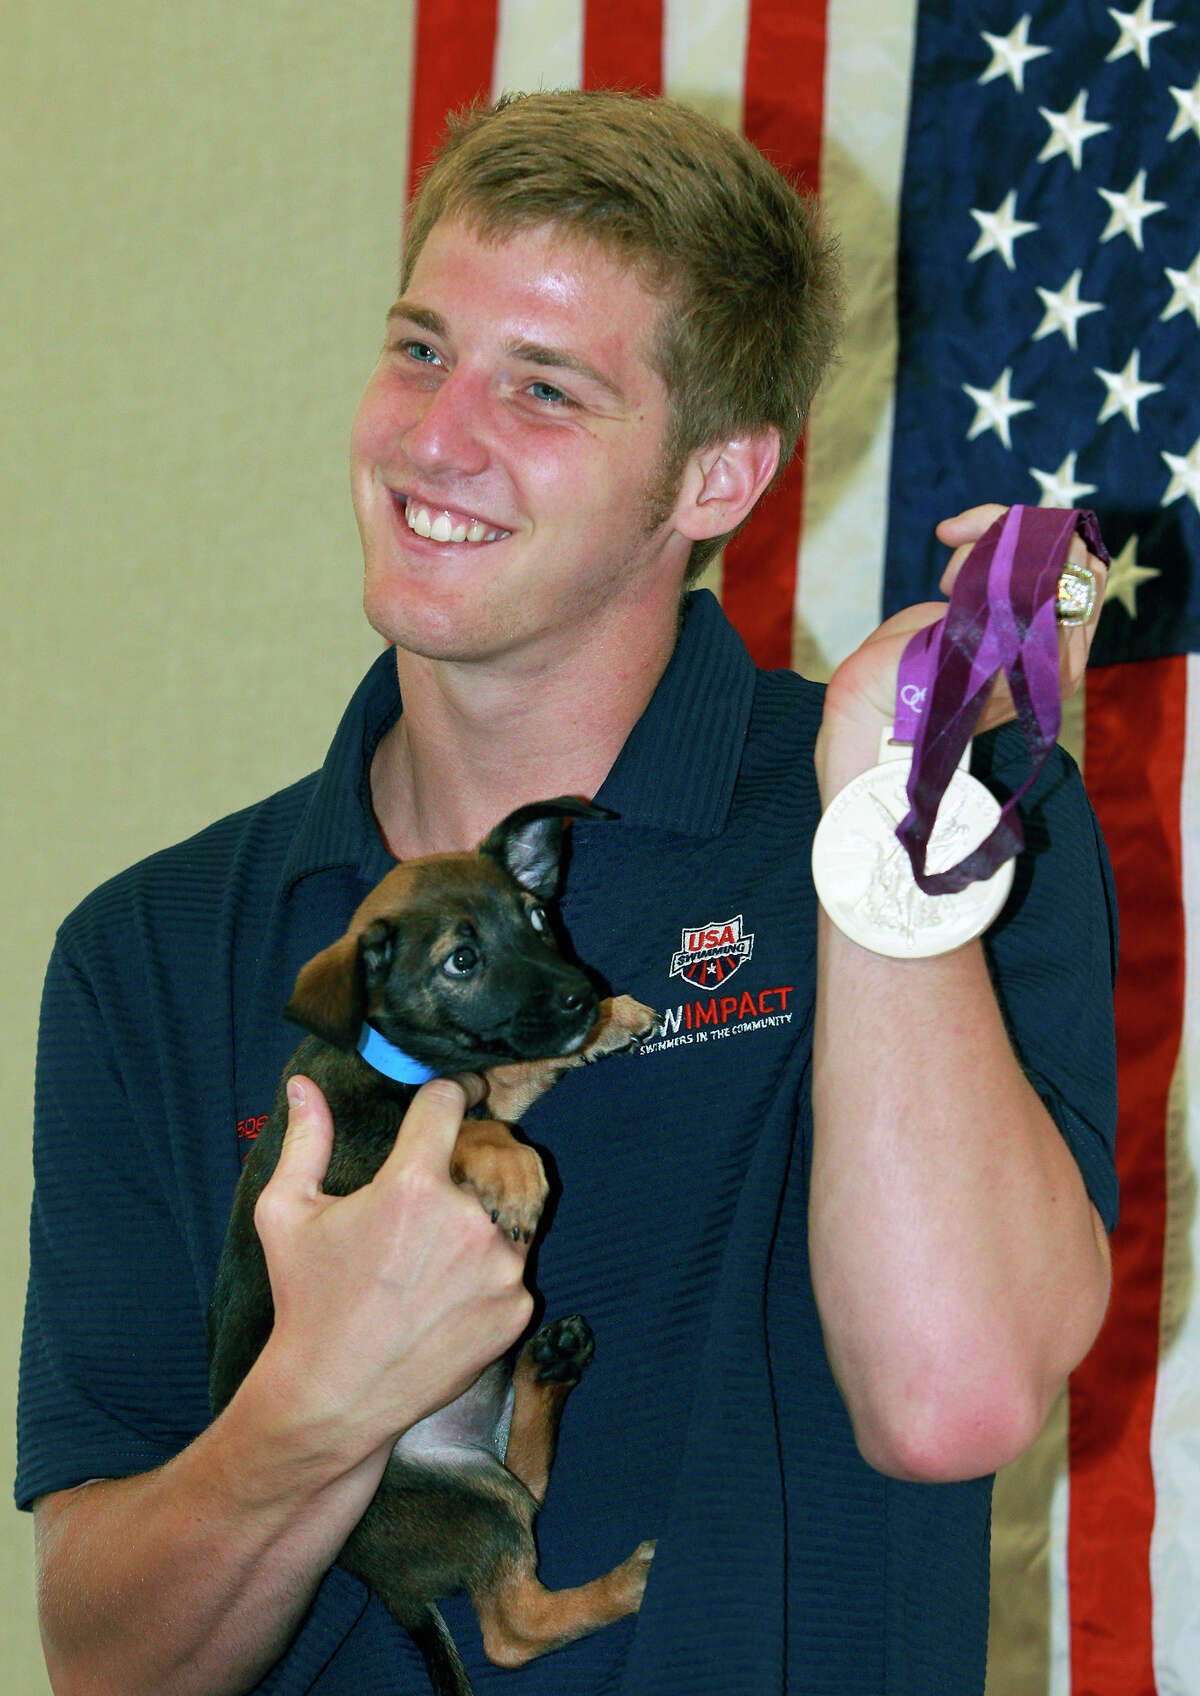 Jimmy Feigen holds a puppy, Cargill, and his silver medal as he meets with fans at the San Antonio Humane Society on August 30, 2012.